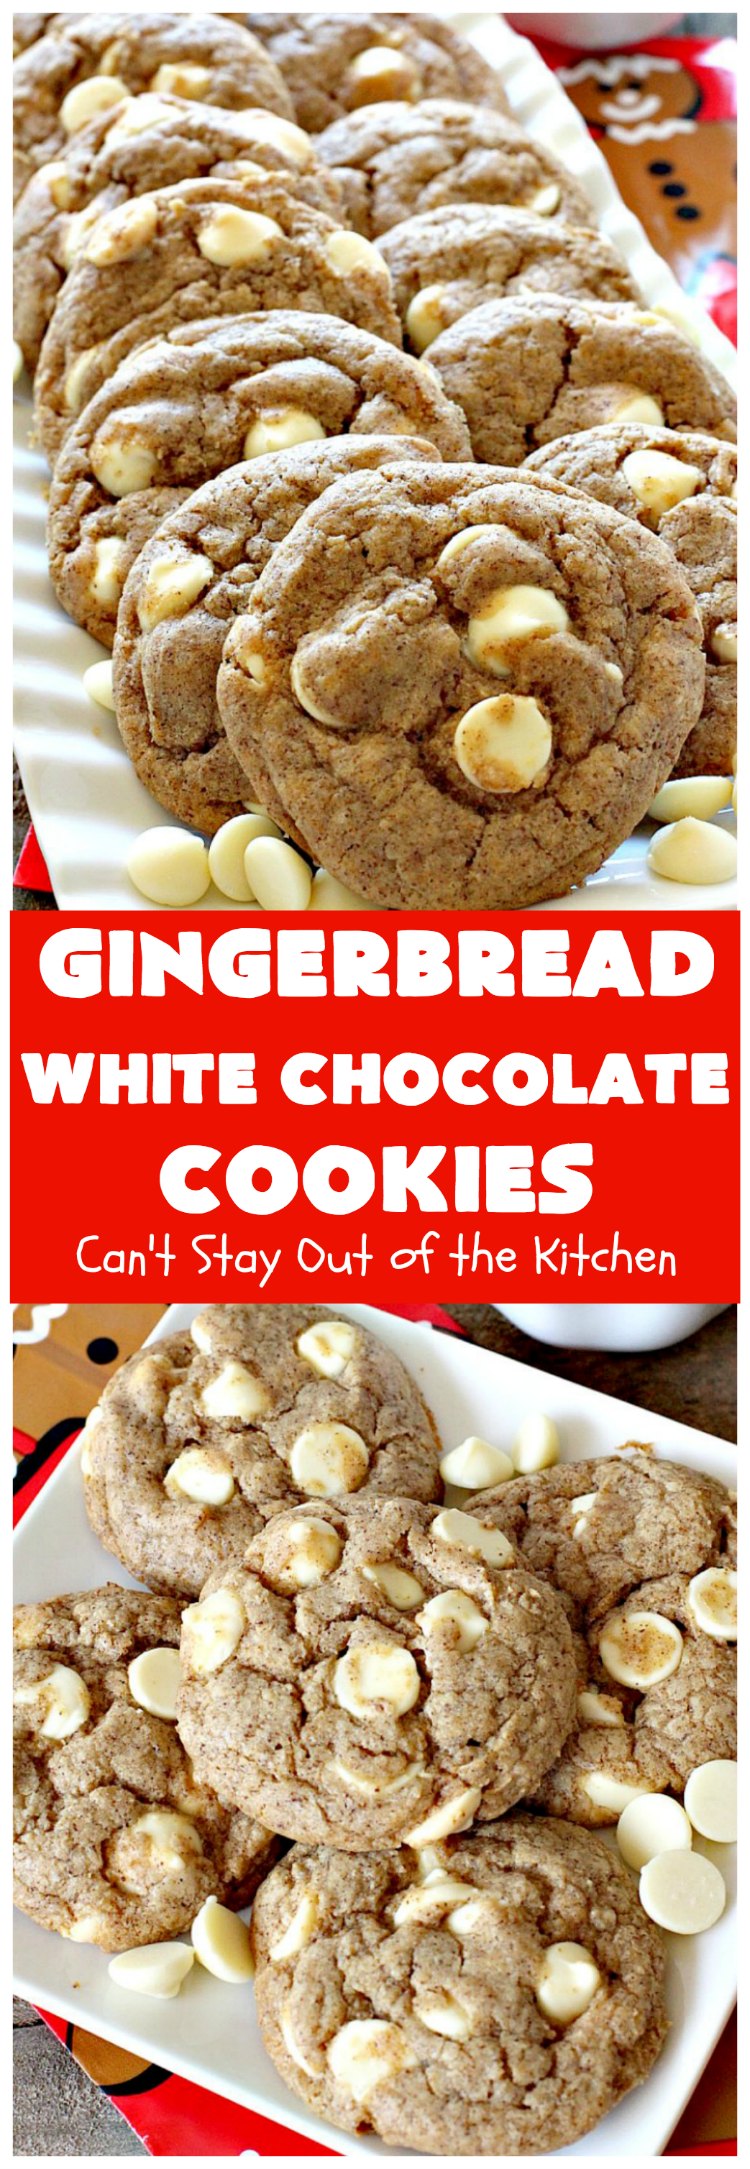 Gingerbread White Chocolate Cookies | Can't Stay Out of the Kitchen